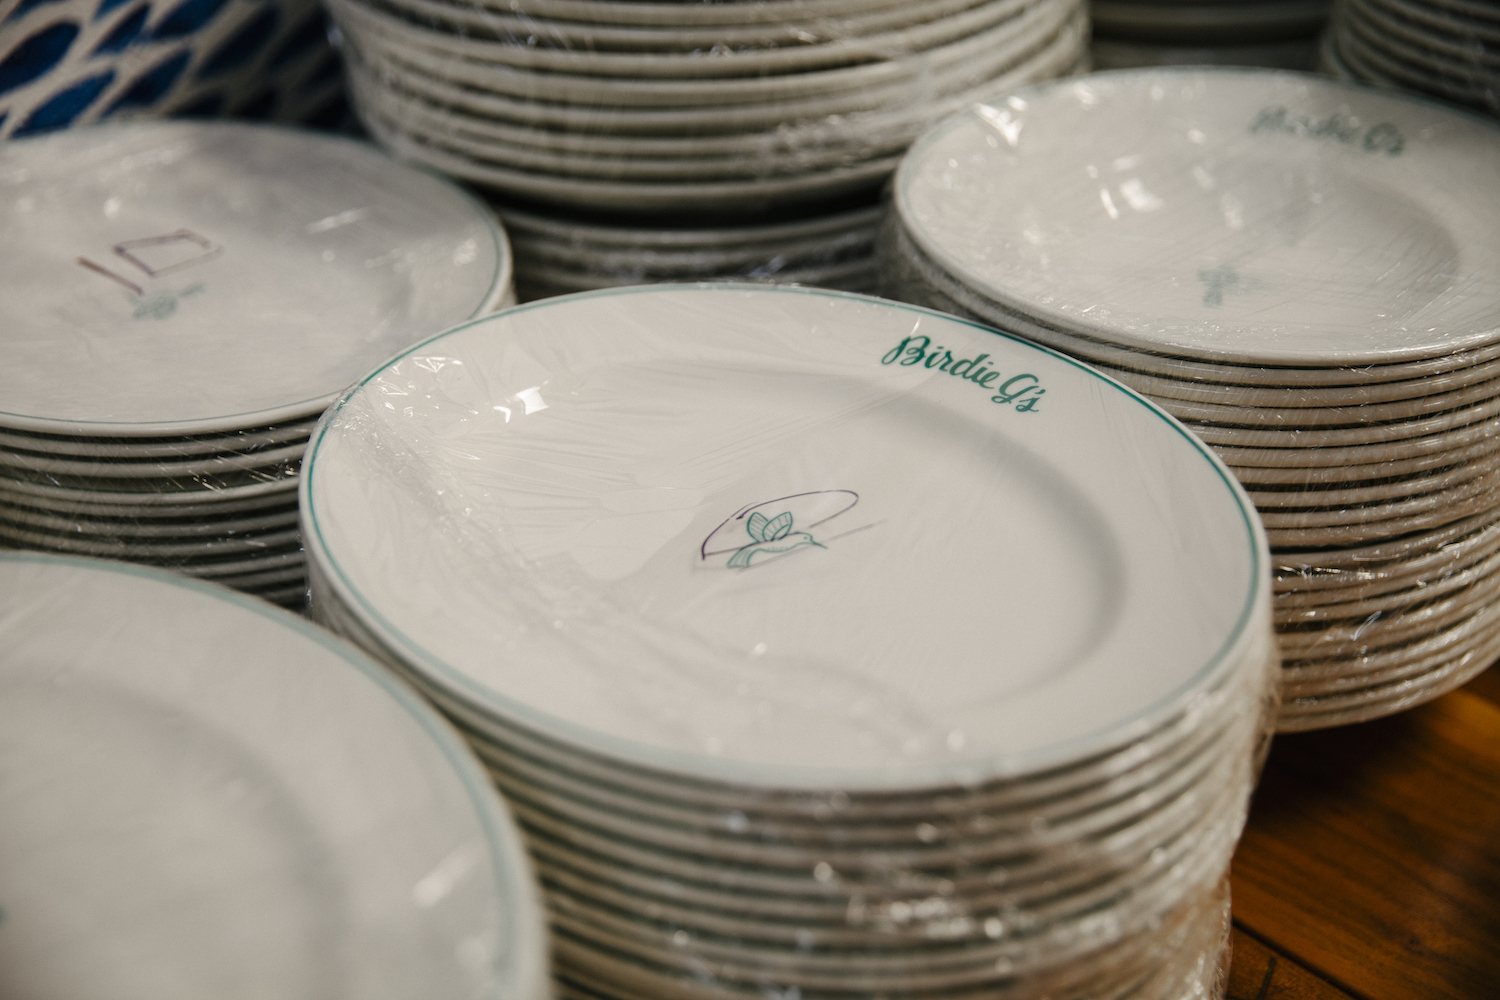 A stack of plates with the Birdie G's logo. December 2020